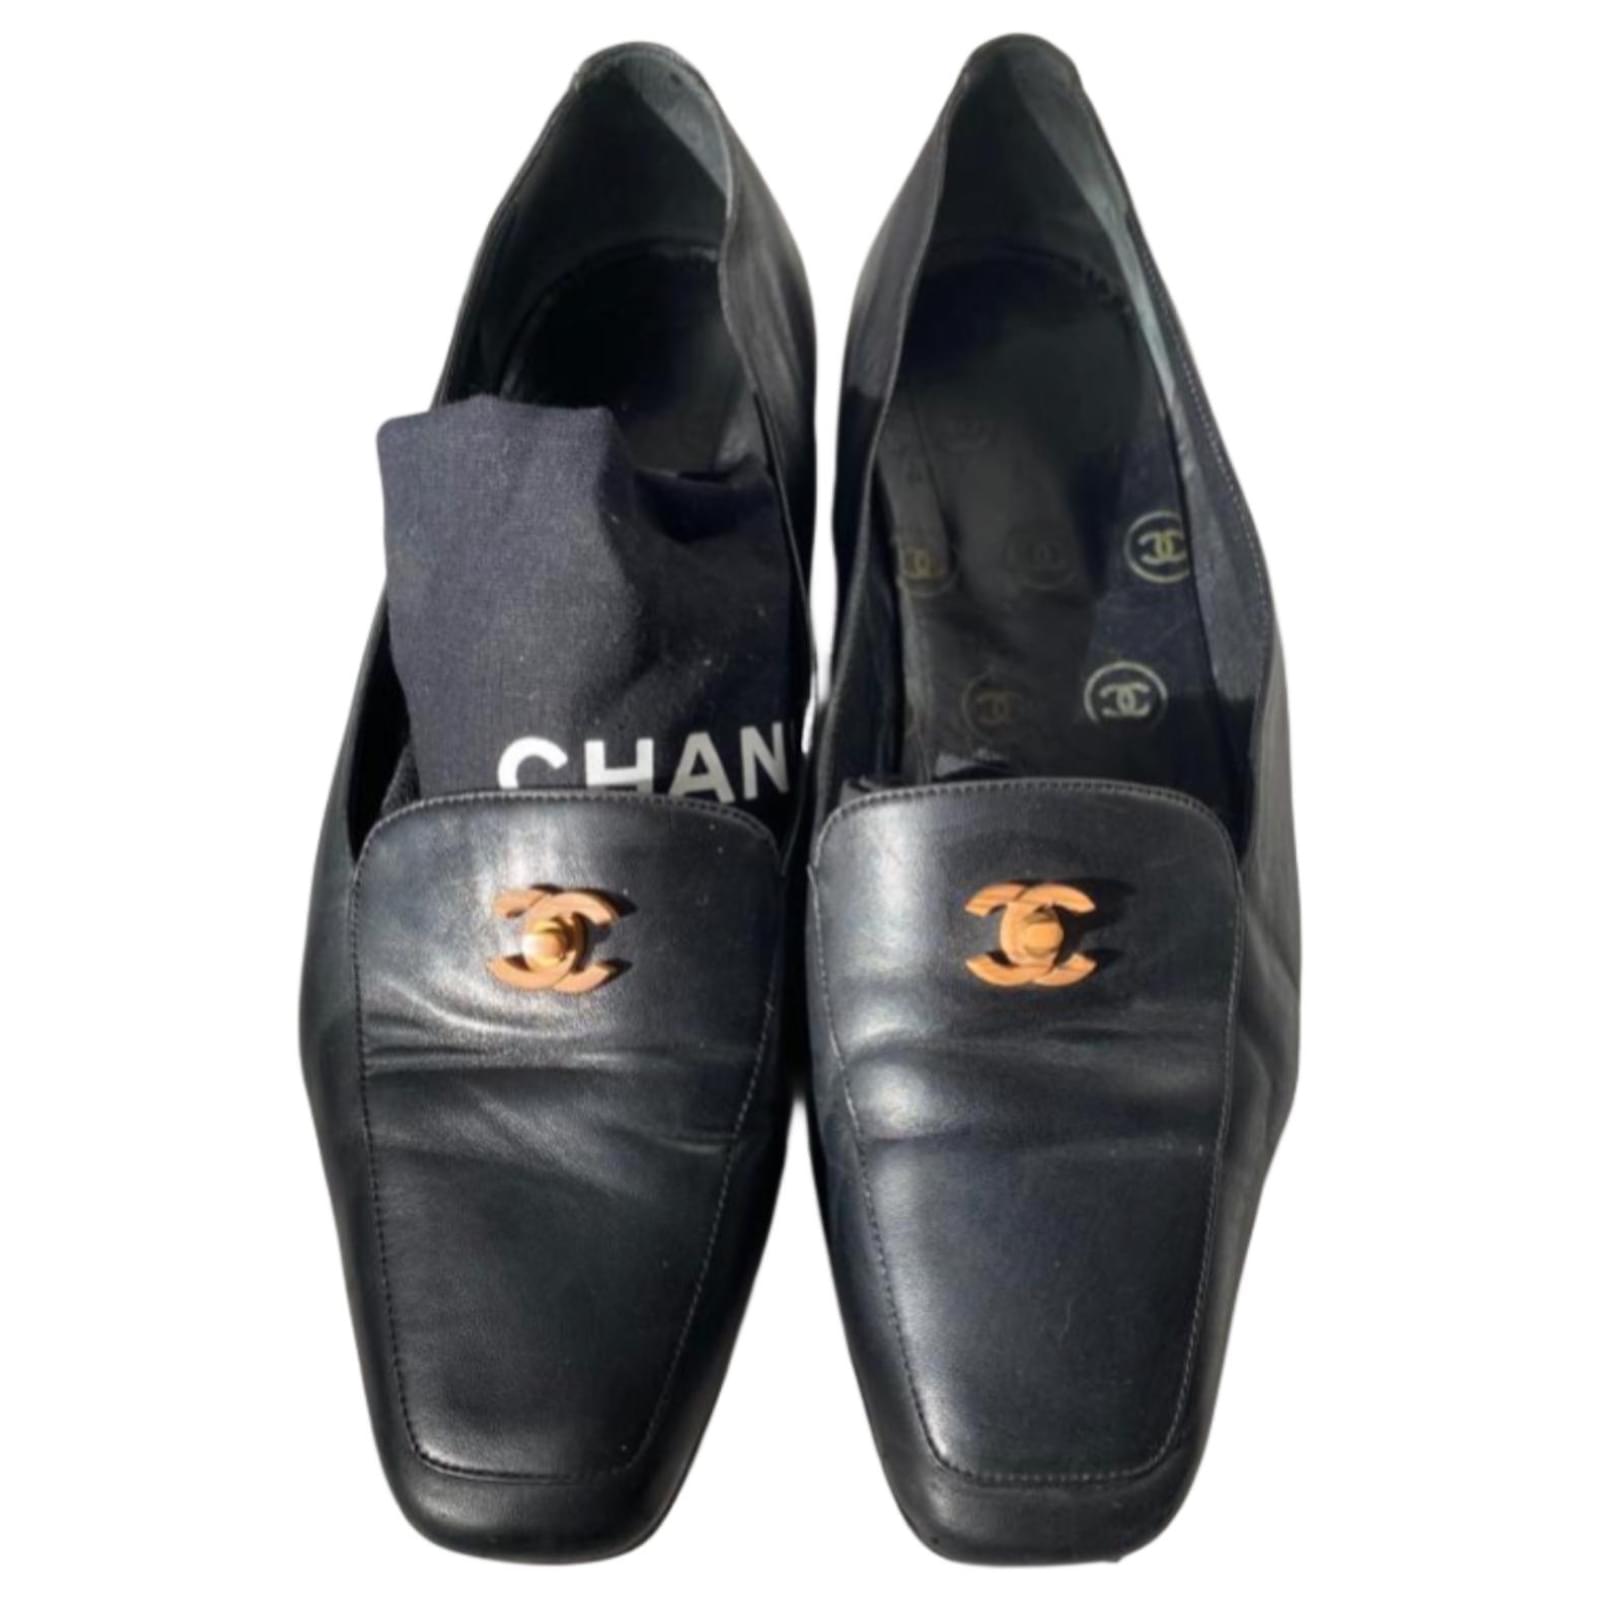 Chanel Slip-Ons — Give Up The Good$